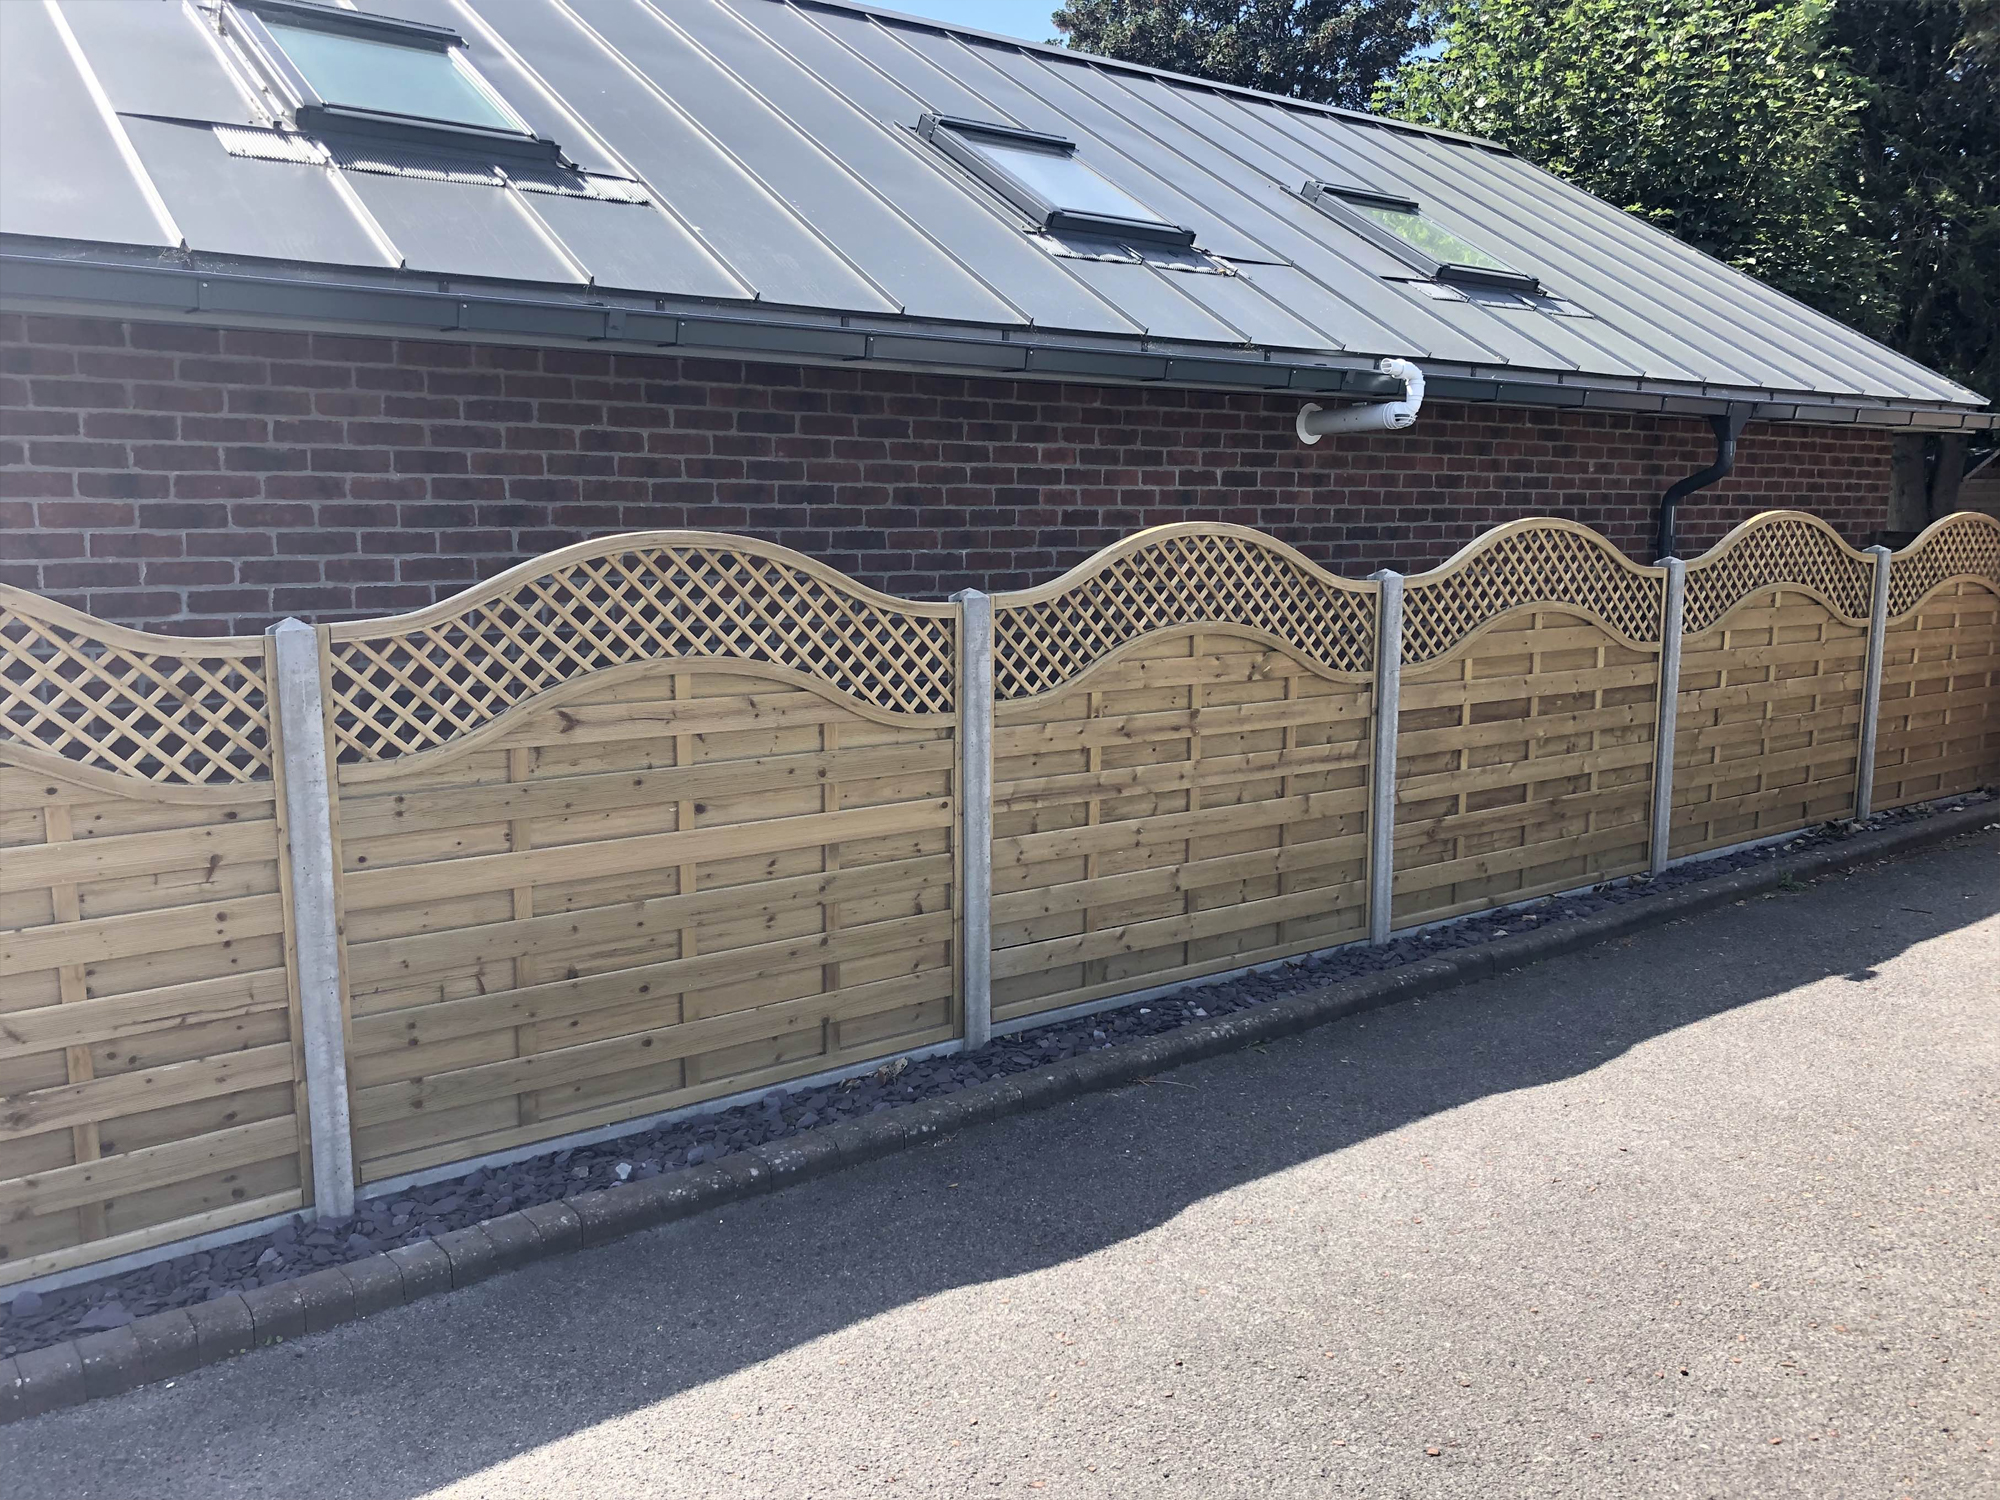 Wooden panel garden fence with trellis top by North Oaks Fencing in Hampshire